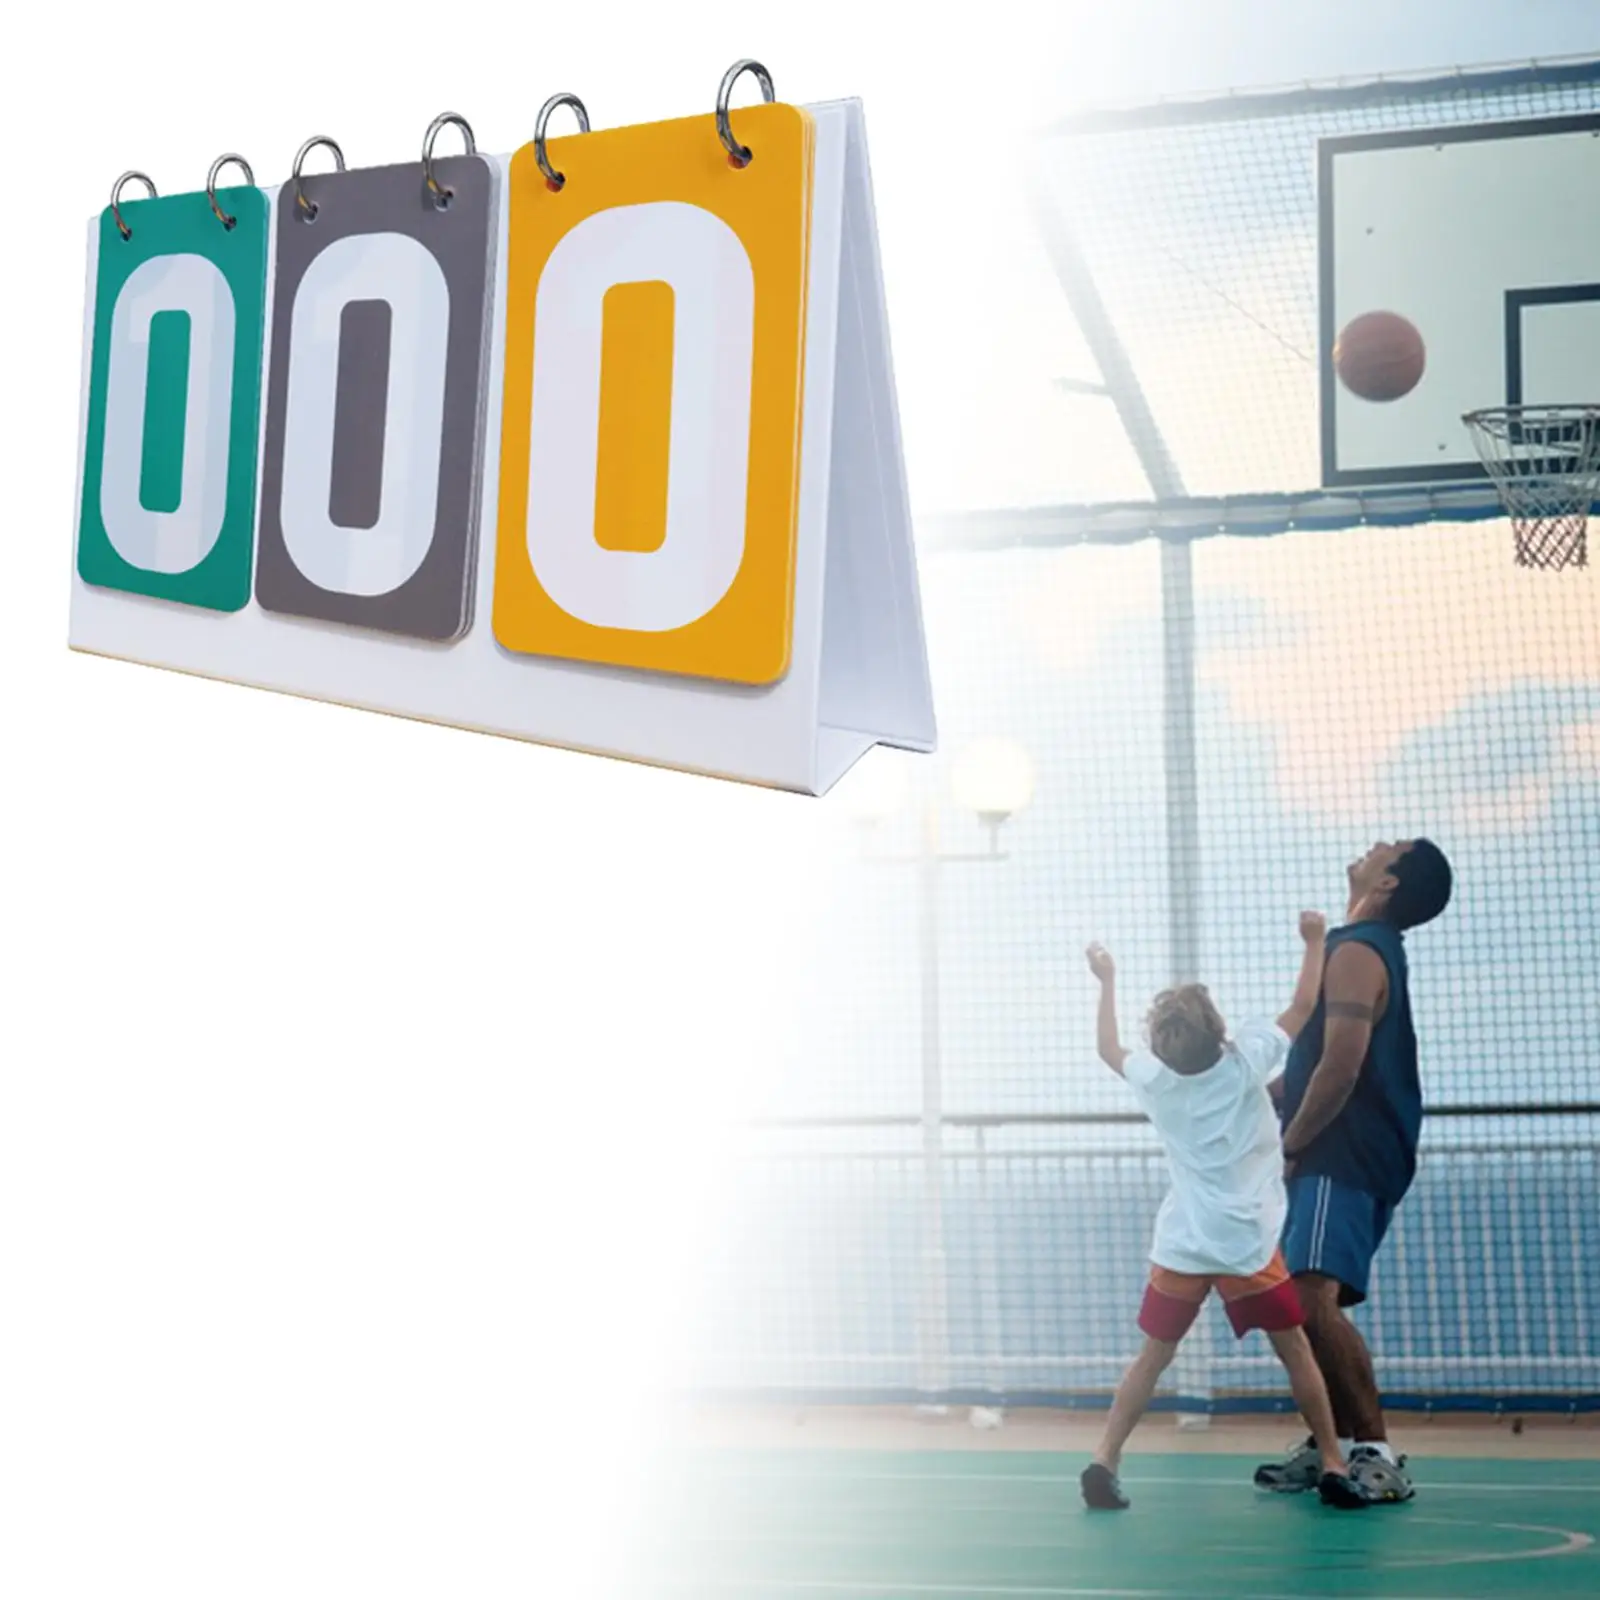 Multi Sports Scoreboard 3 digits Table Score Flippers Score Counter for Volleyball Competition Football Badminton Tennis Ball